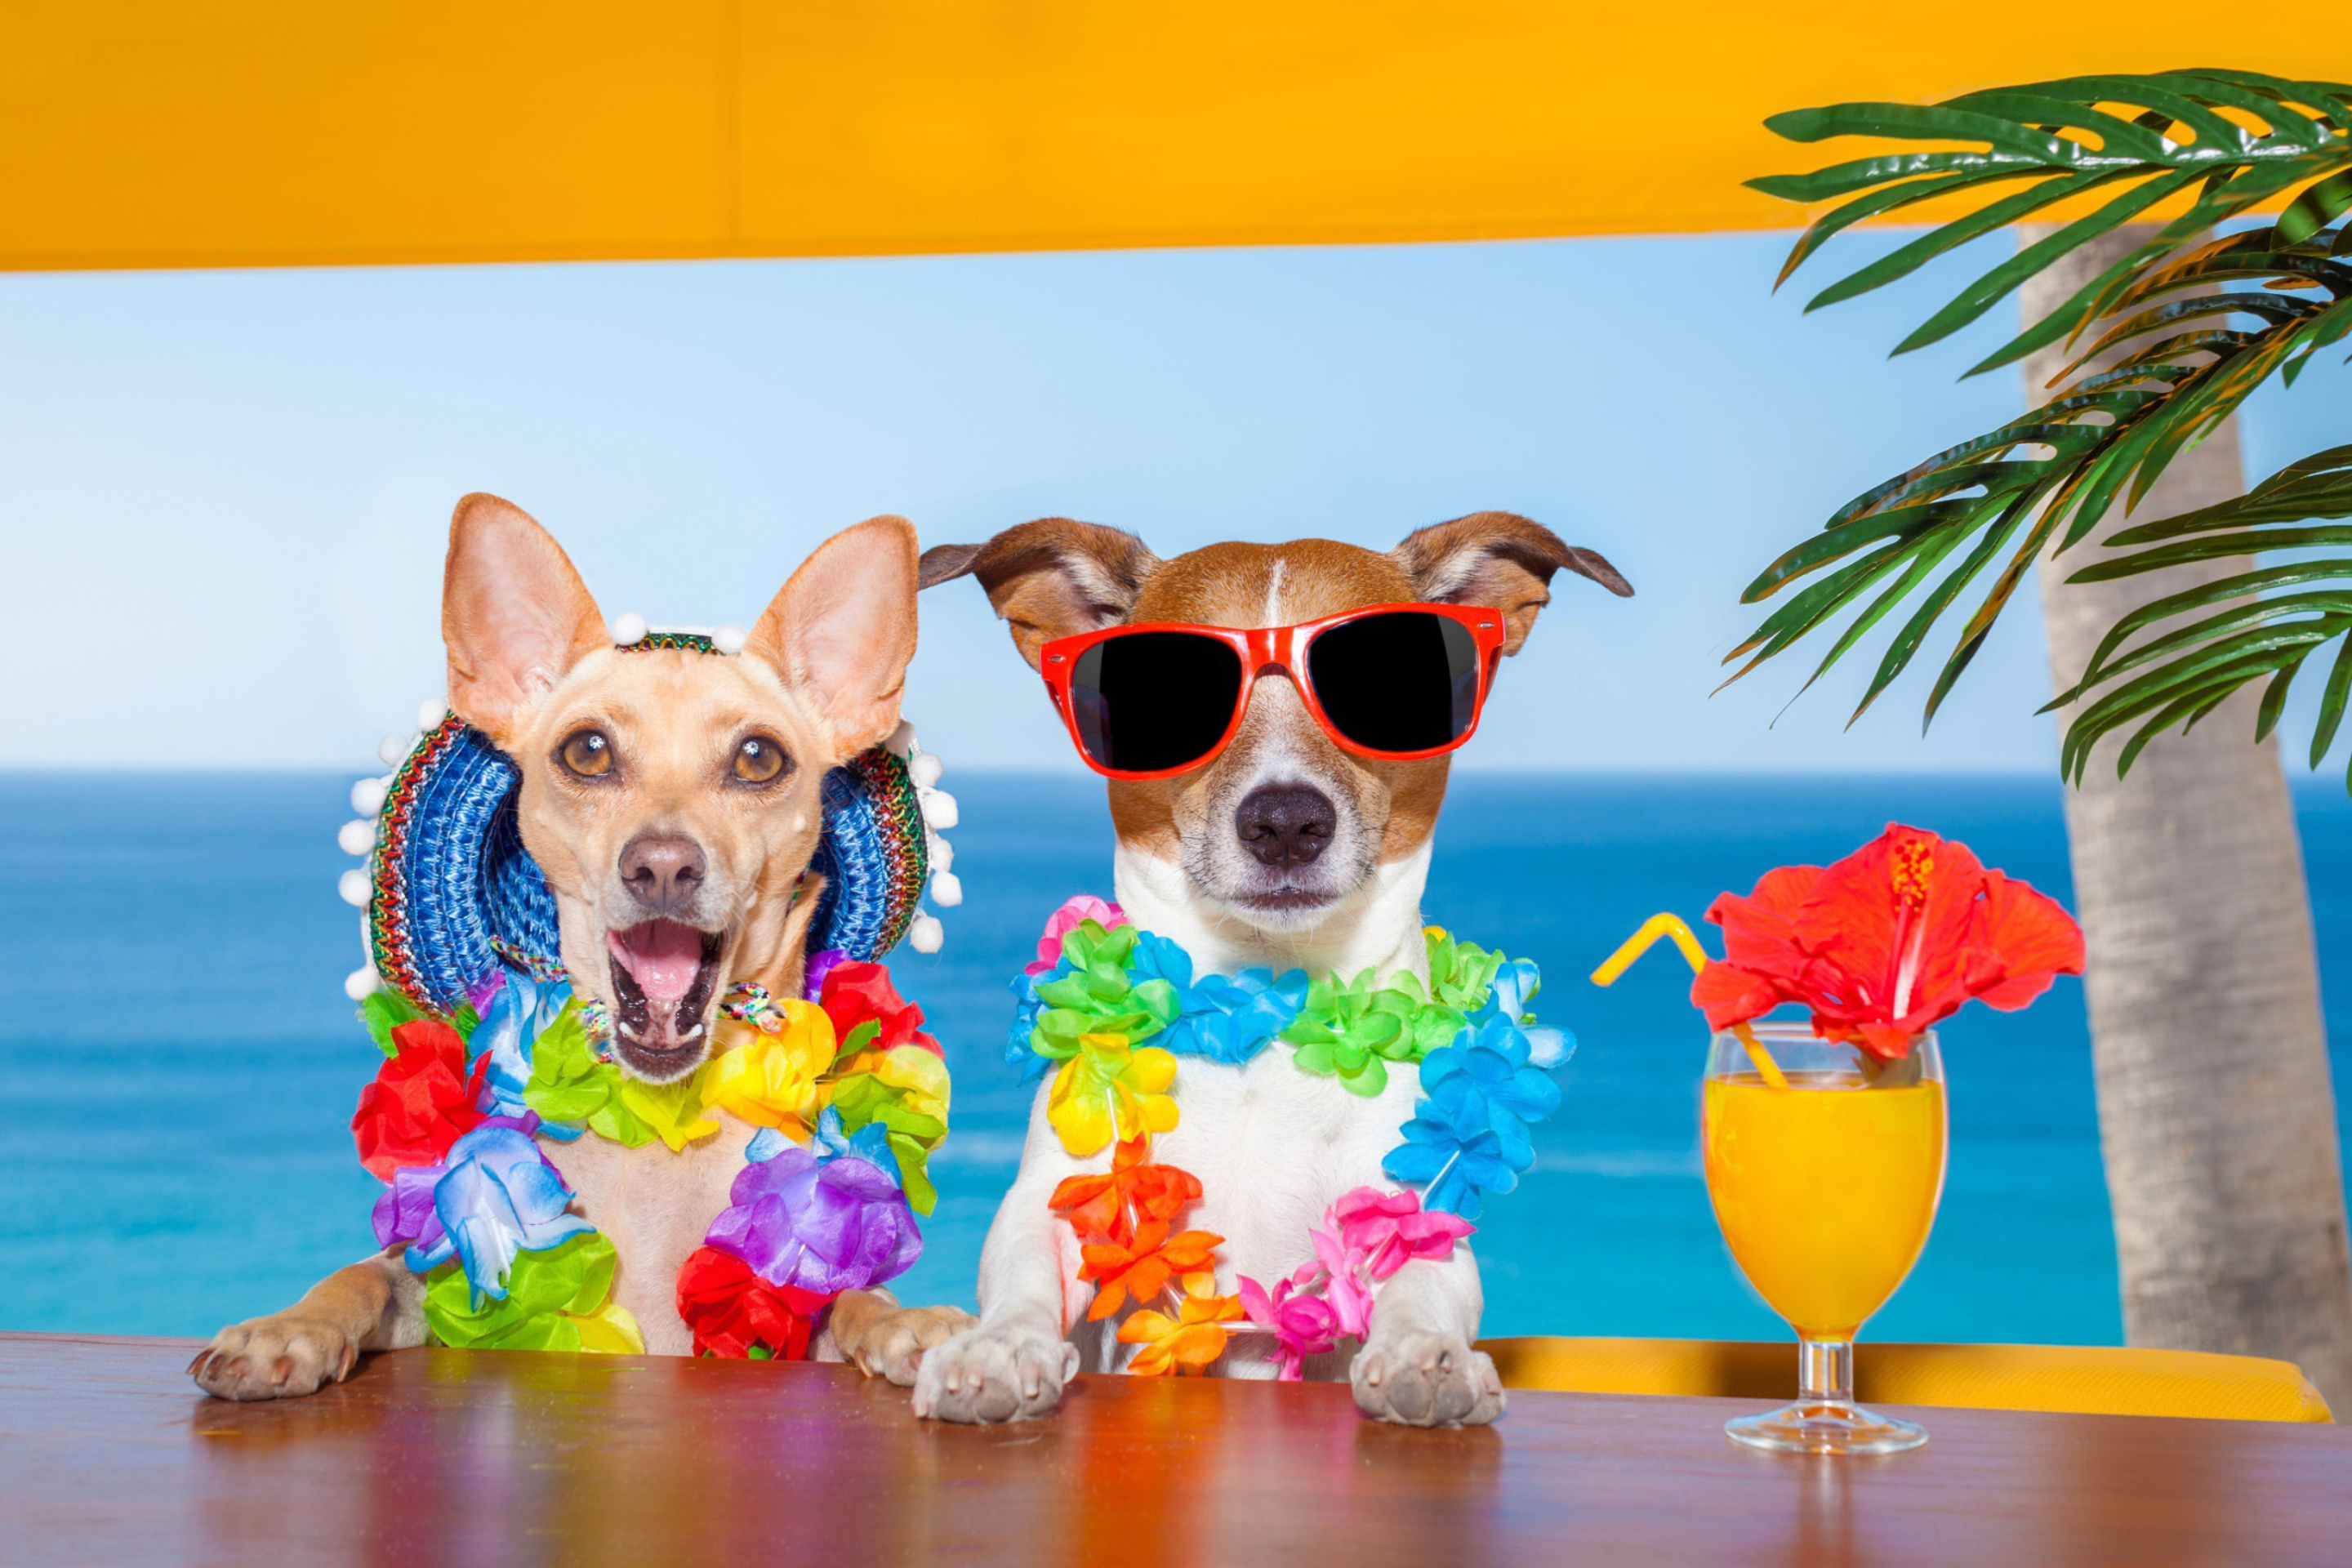 Dogs in tropical Apparel wallpaper 2880x1920